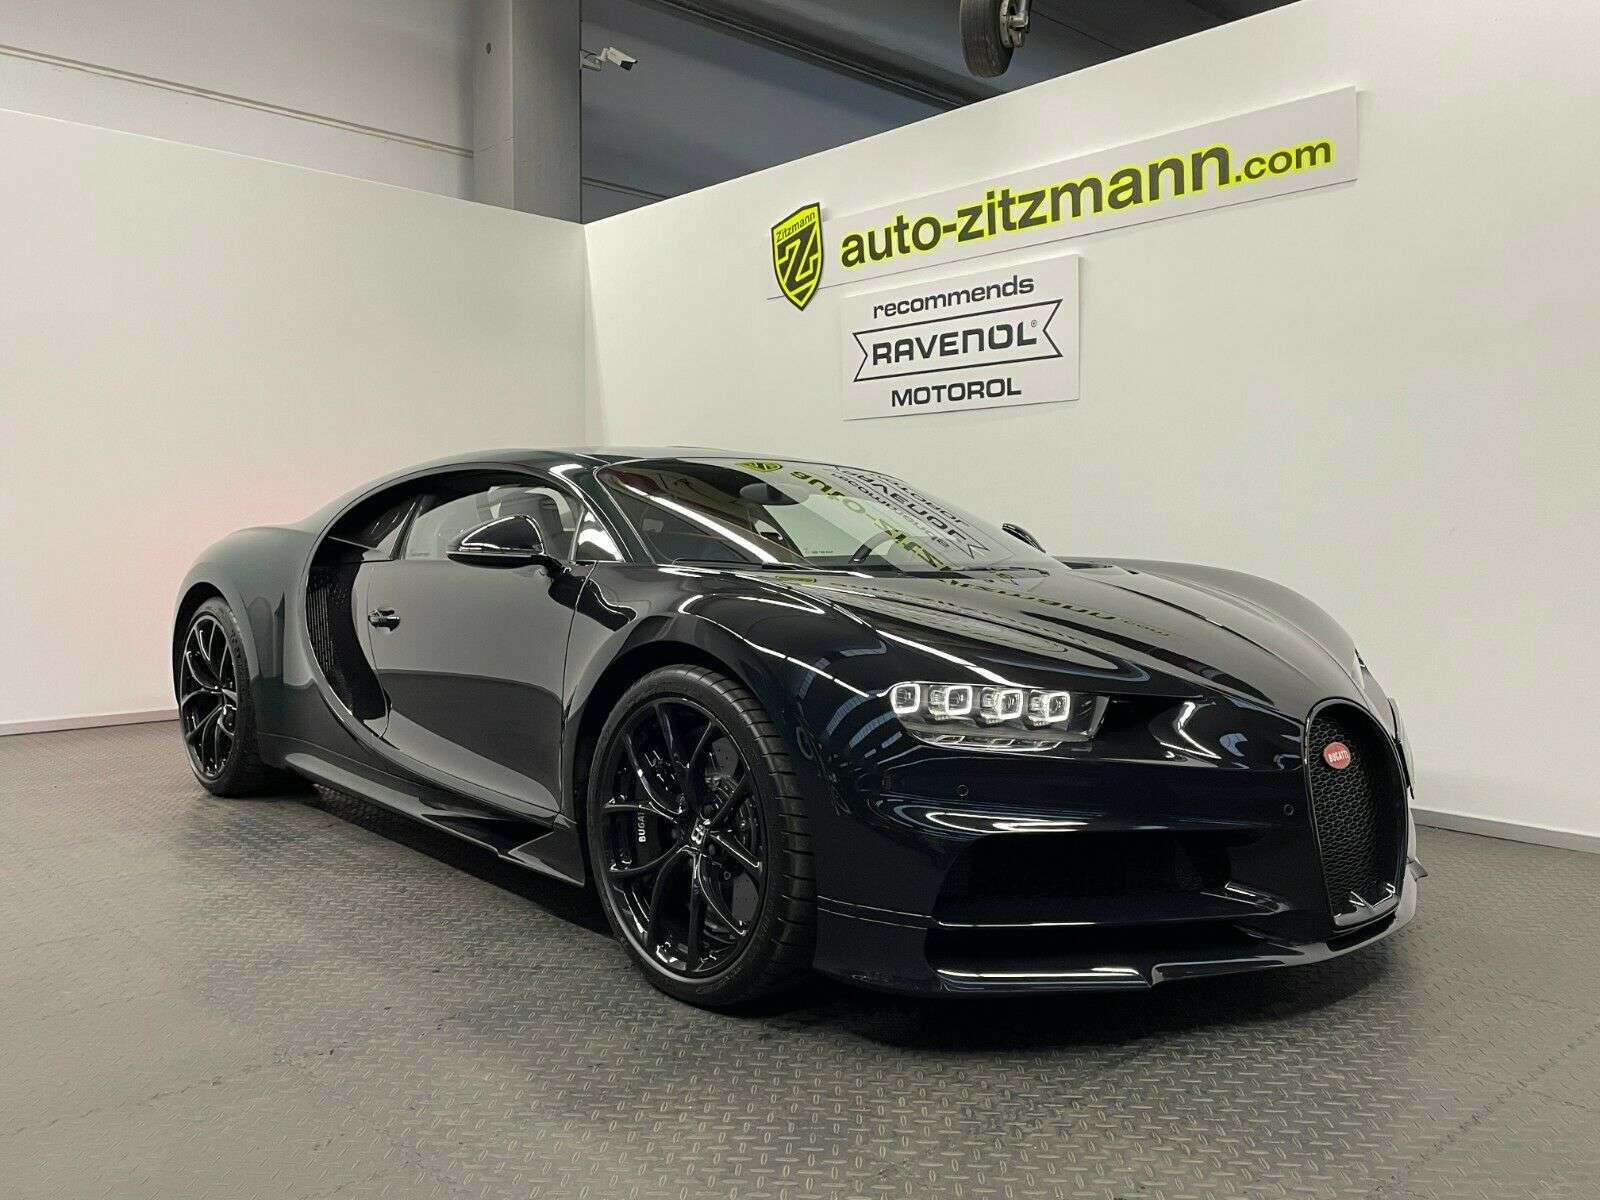 Bugatti Chiron Coupe in Black used in Nürnberg for € 3,679,900.-